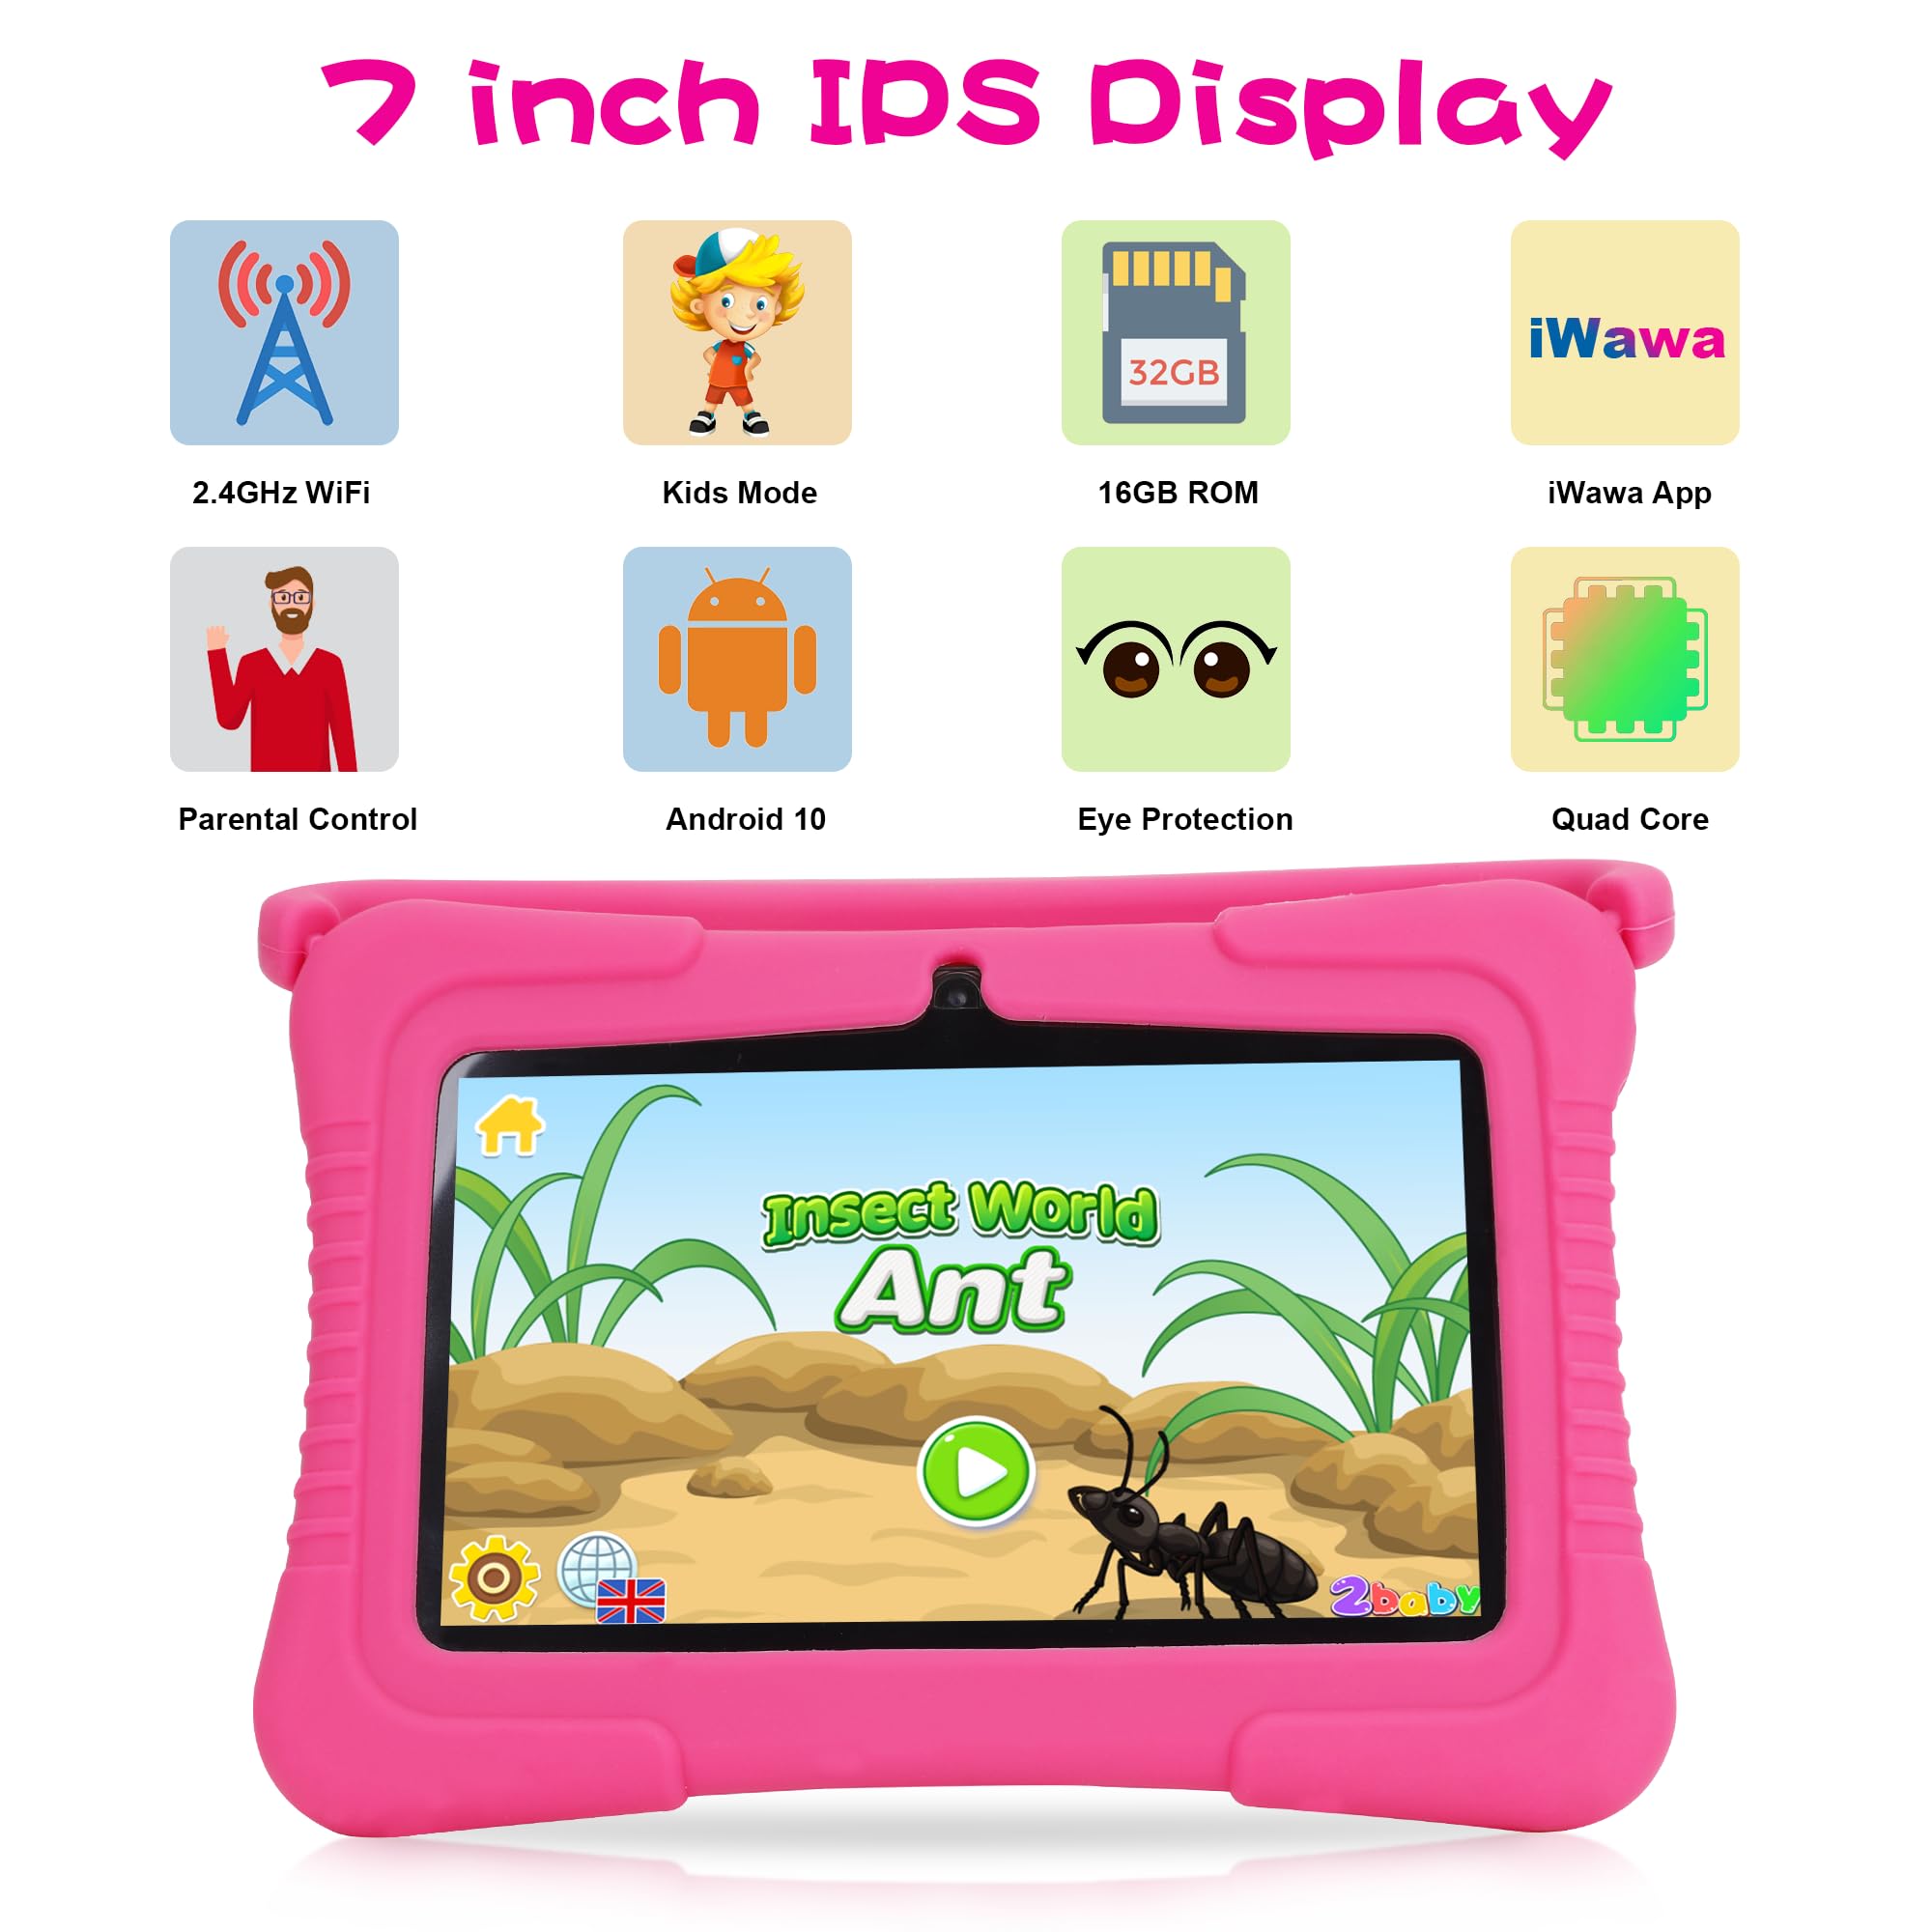 Veidoo Kids Tablets PC, 7 inch Android Kids Tablet with 1GB Ram 16GB Storage, Safety Eye Protection IPS Screen, Premium Parent Control Pre-Installed Educational APP, Best Gift for Children(Pink)